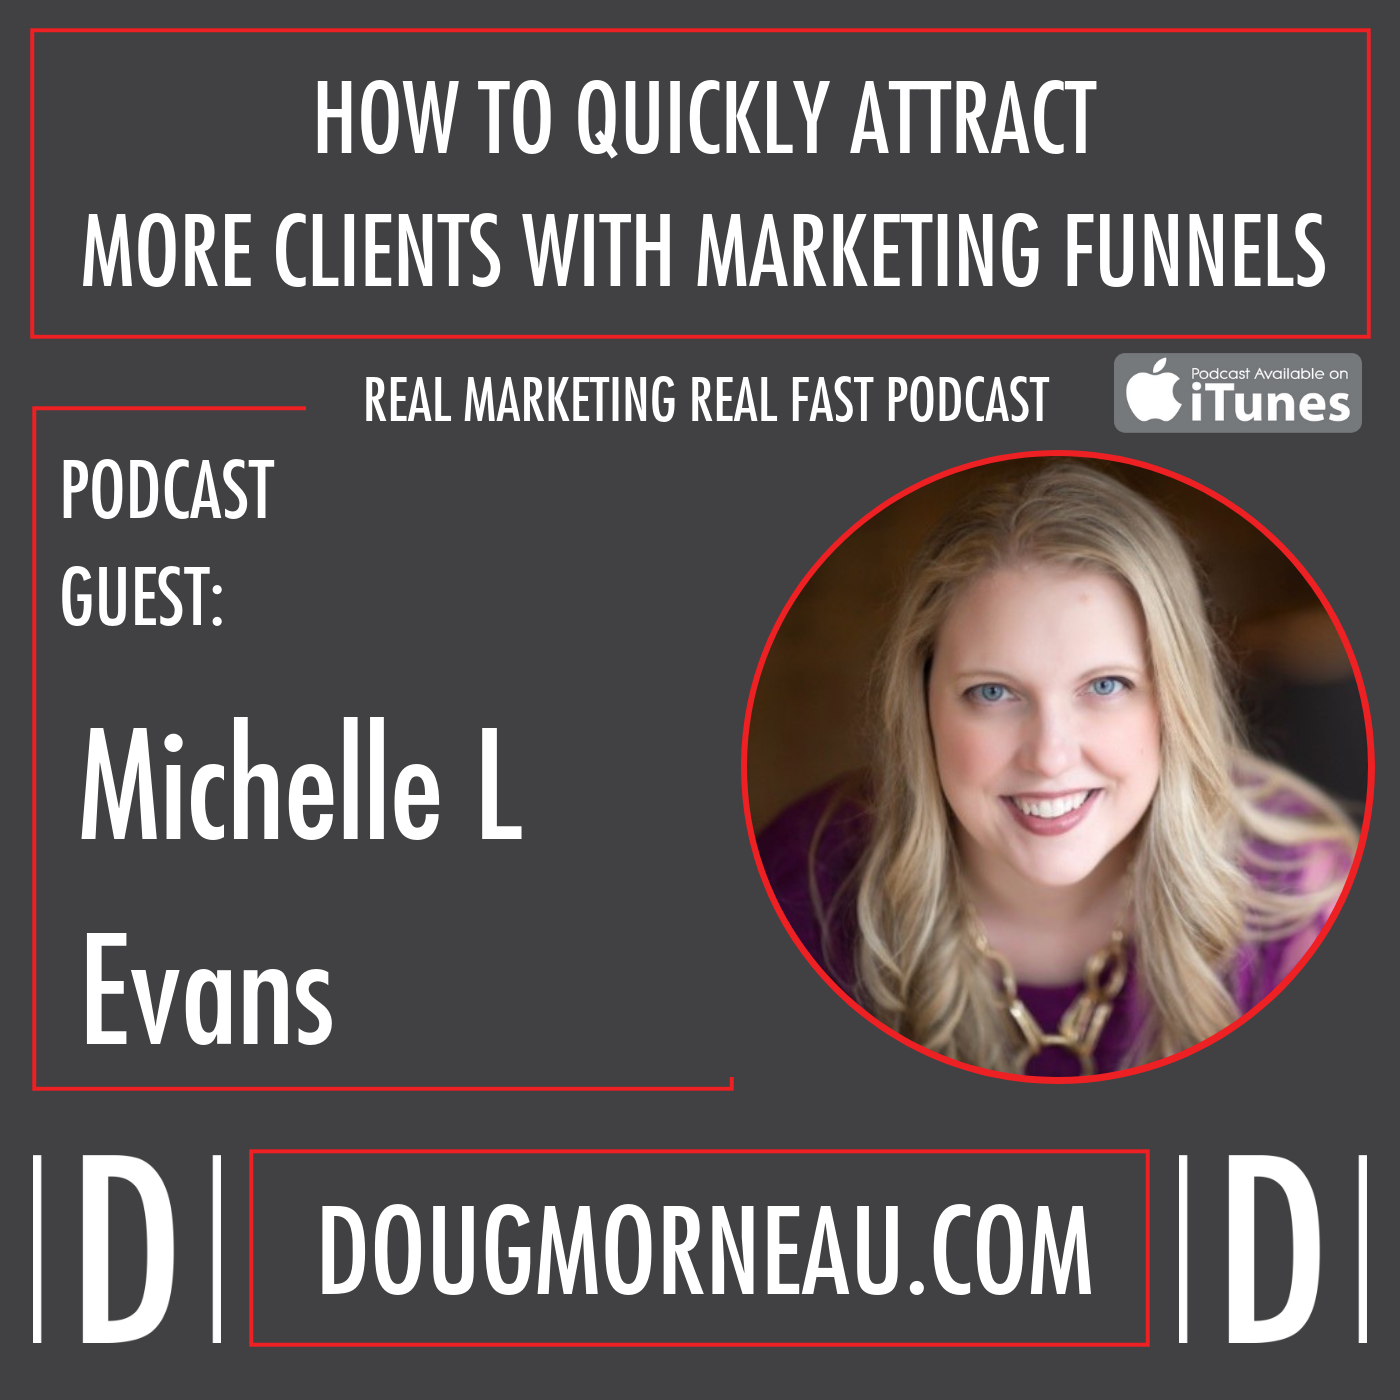 HOW TO QUICKLY ATTRACT MORE CLIENTS WITH MARKETING FUNNELS MICHELLE EVANS - DOUG MORNEAU - REAL MARKETING REAL FAST PODCAST